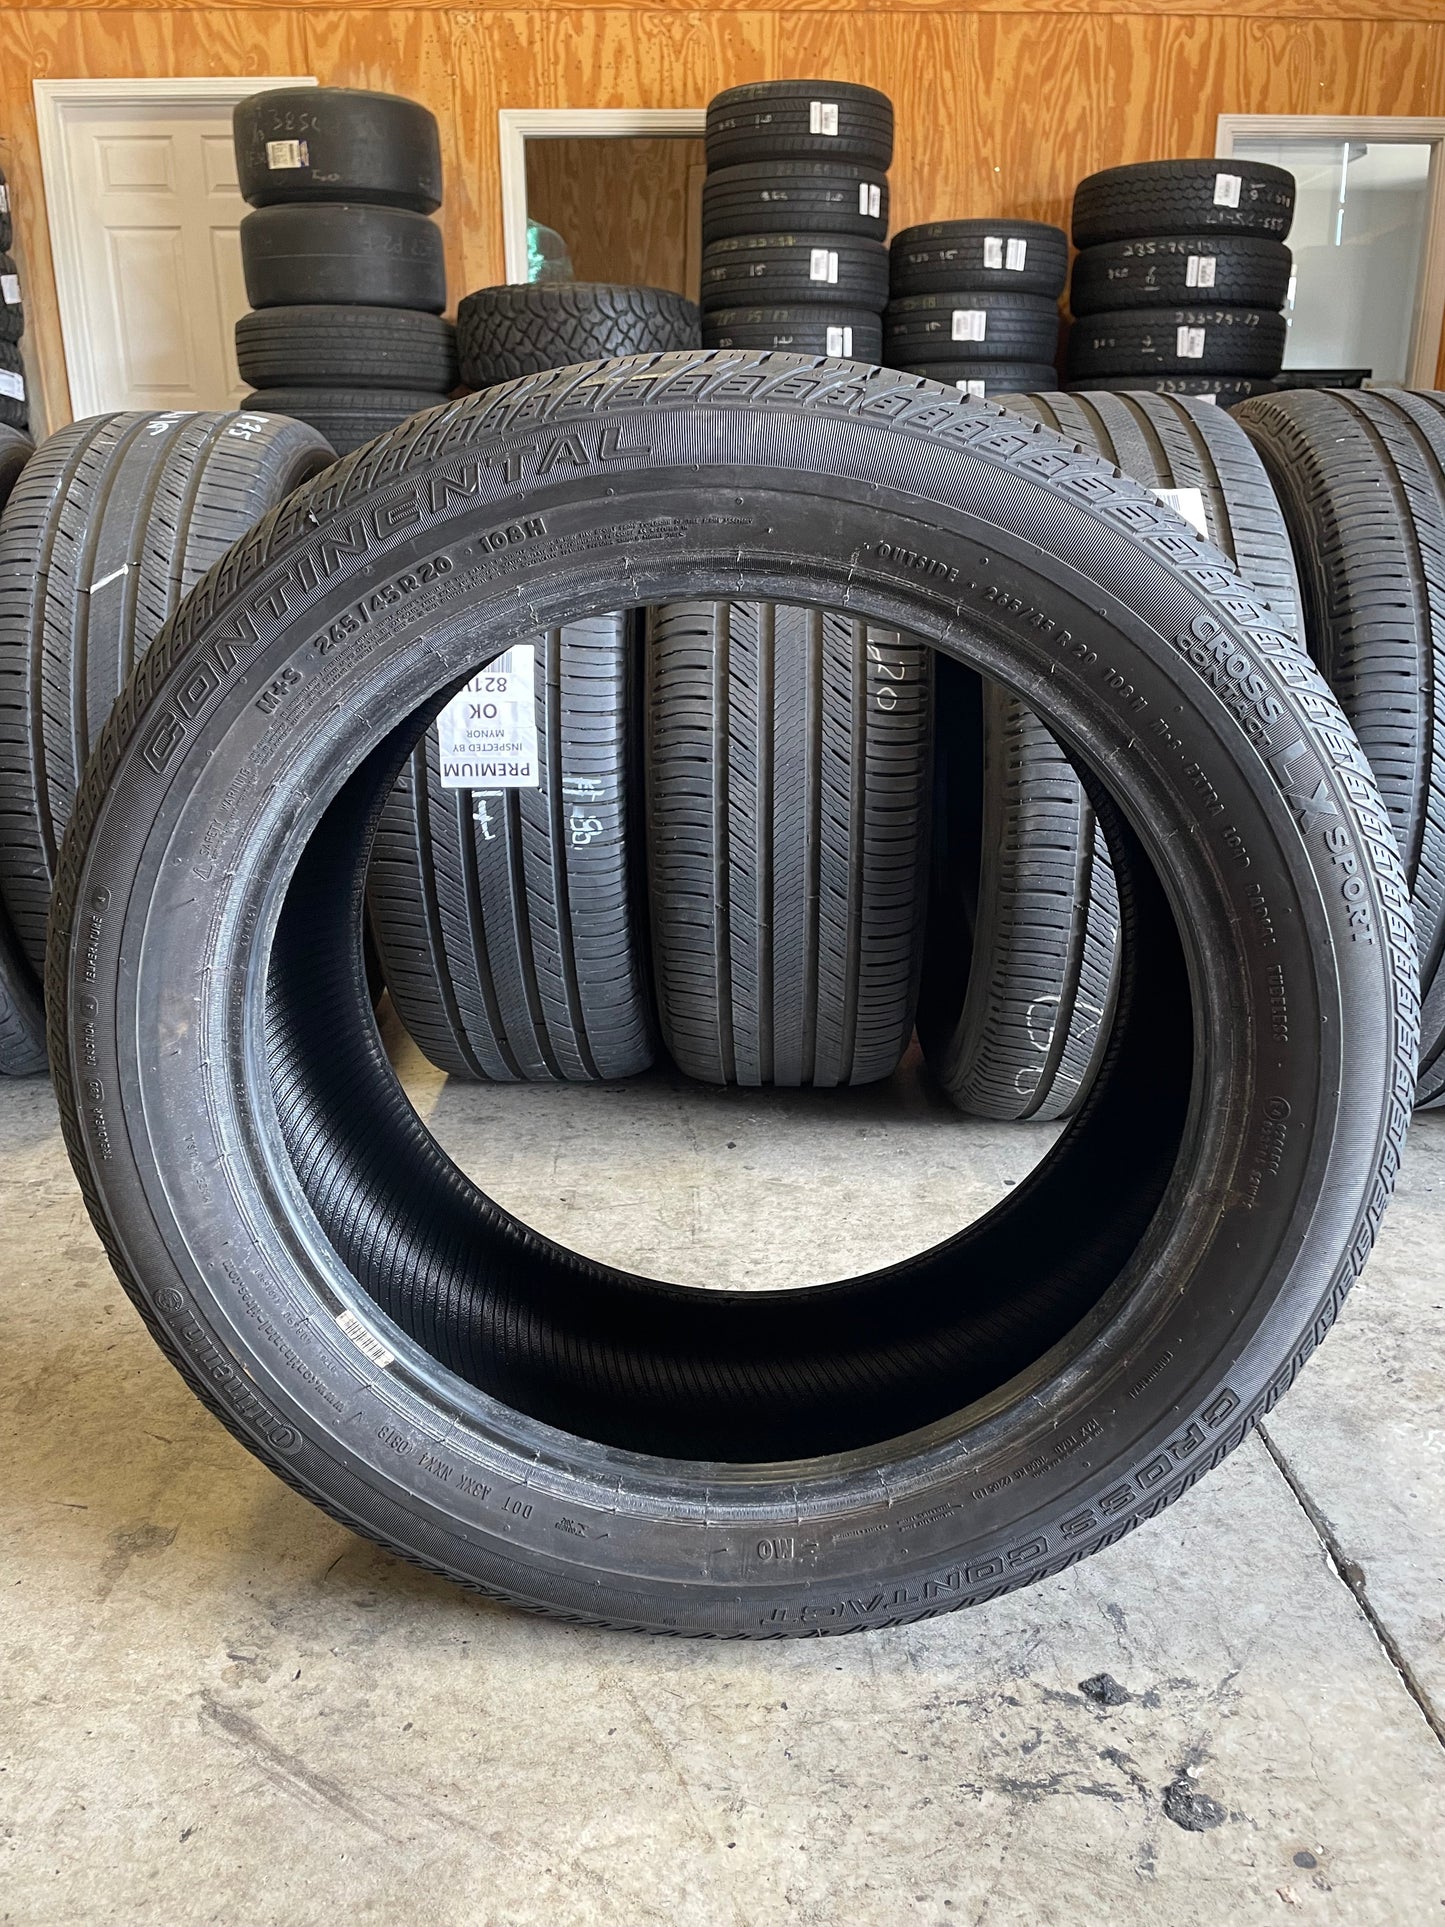 SINGLE 265/45R20 Continental Crooss Contact LX Sport 108 H XL - Used Tires